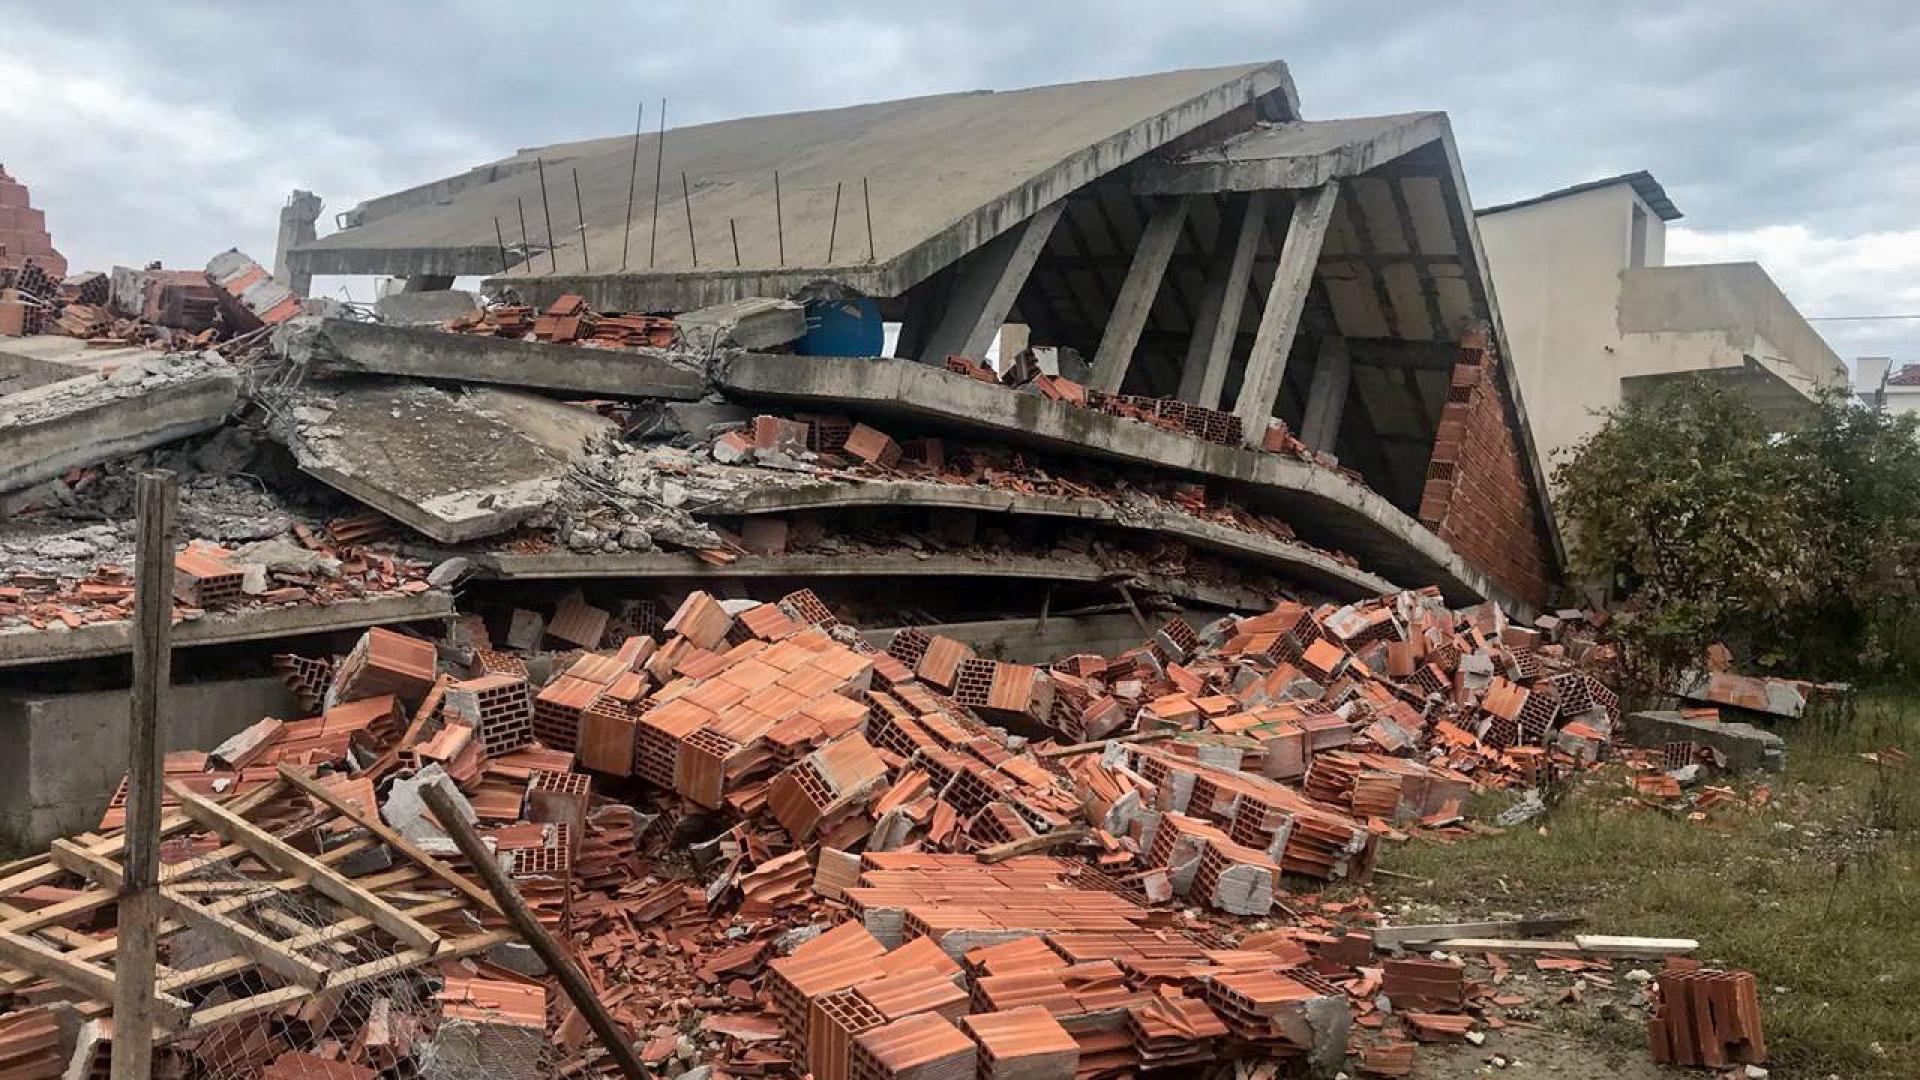 A 6.4 magnitude earthquake wreaked havoc on people's lives, toppling homes and businesses in Albania.